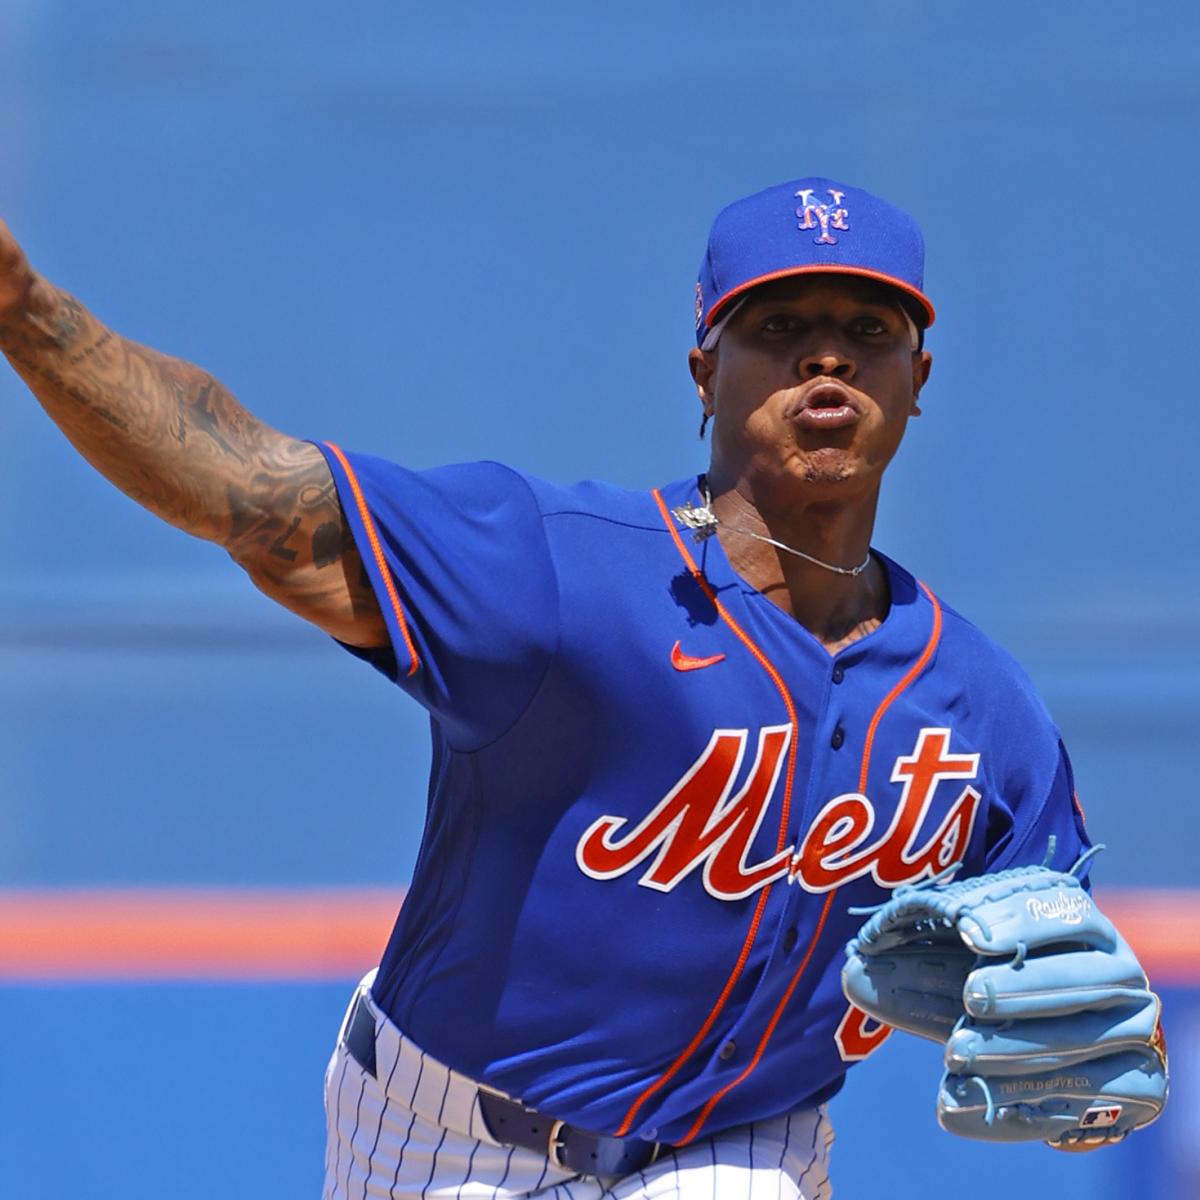 Mets SP Marcus Stroman Changes Jersey to No. 0 Ahead of 2020 Season